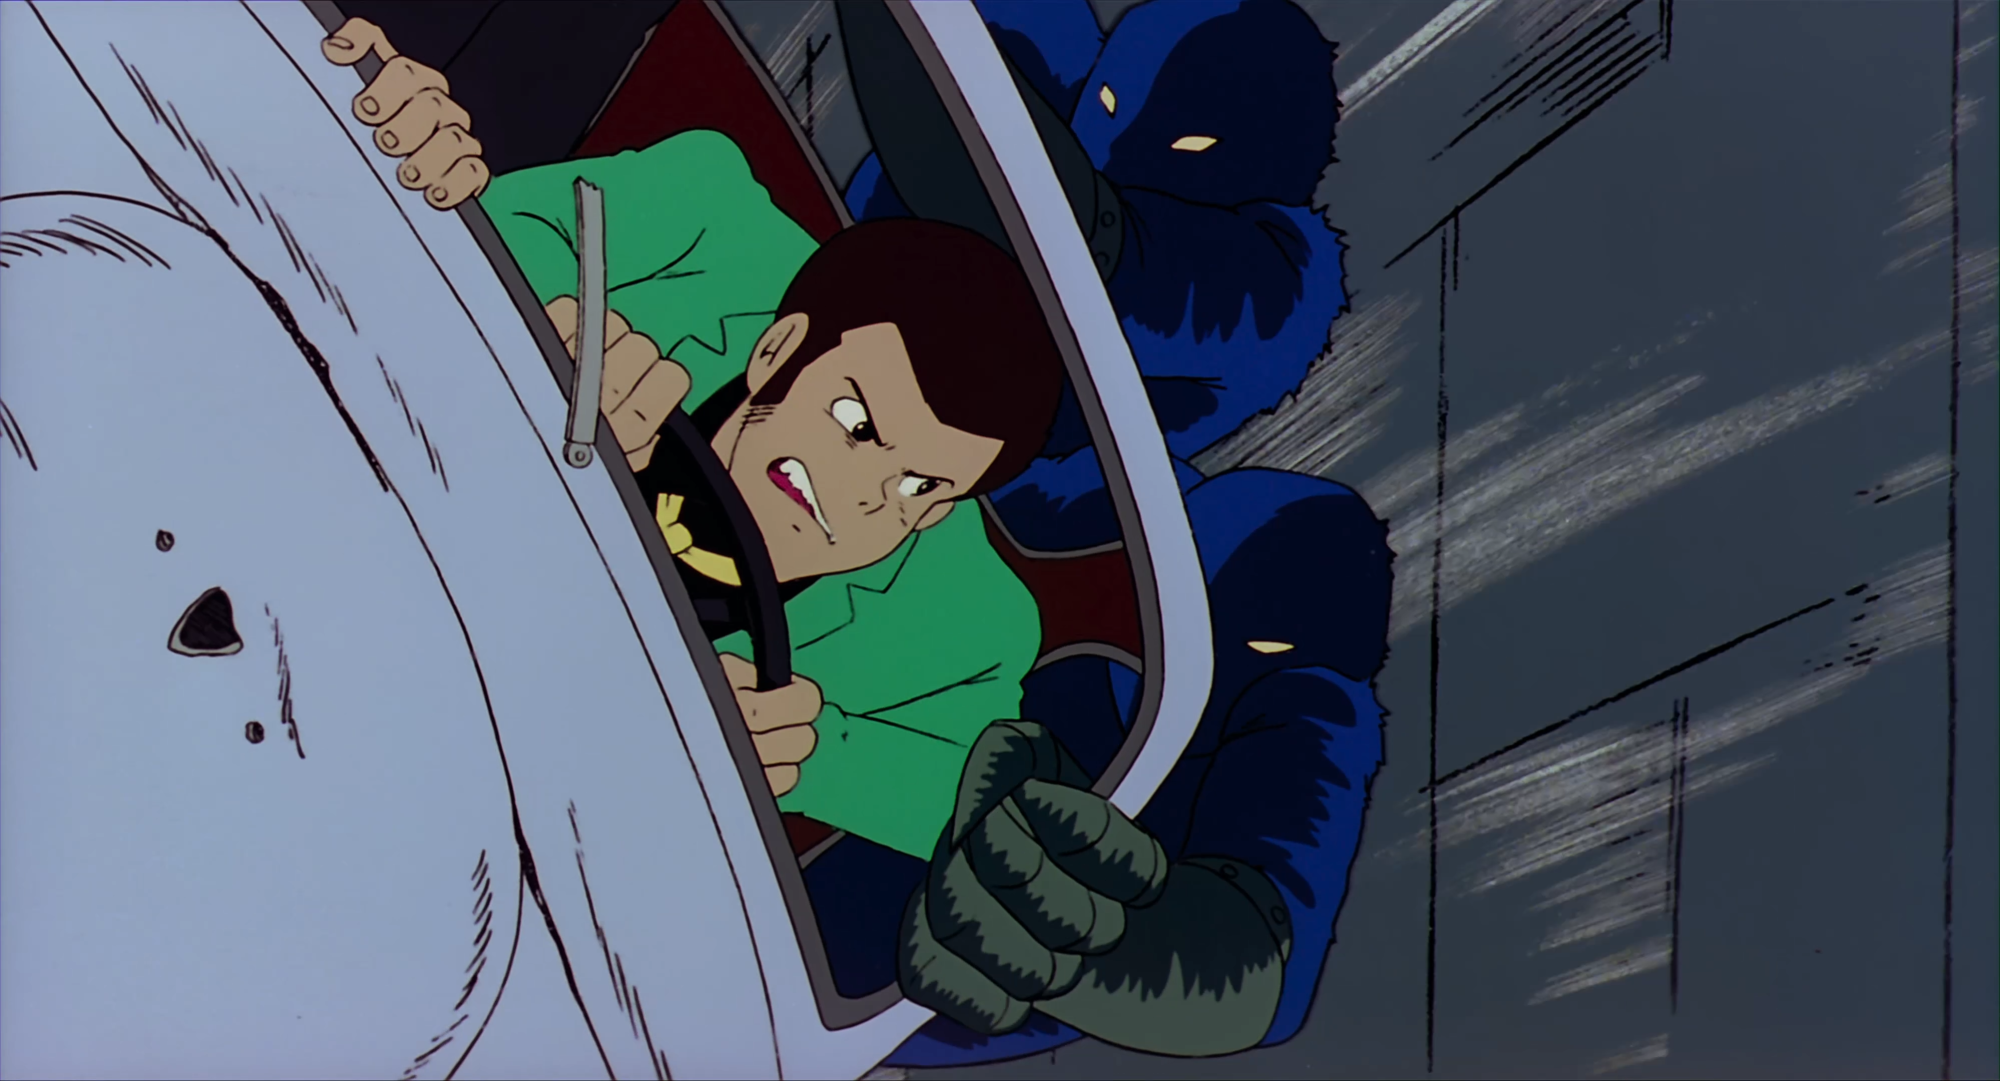 Lupin_Still_23.22.19.png